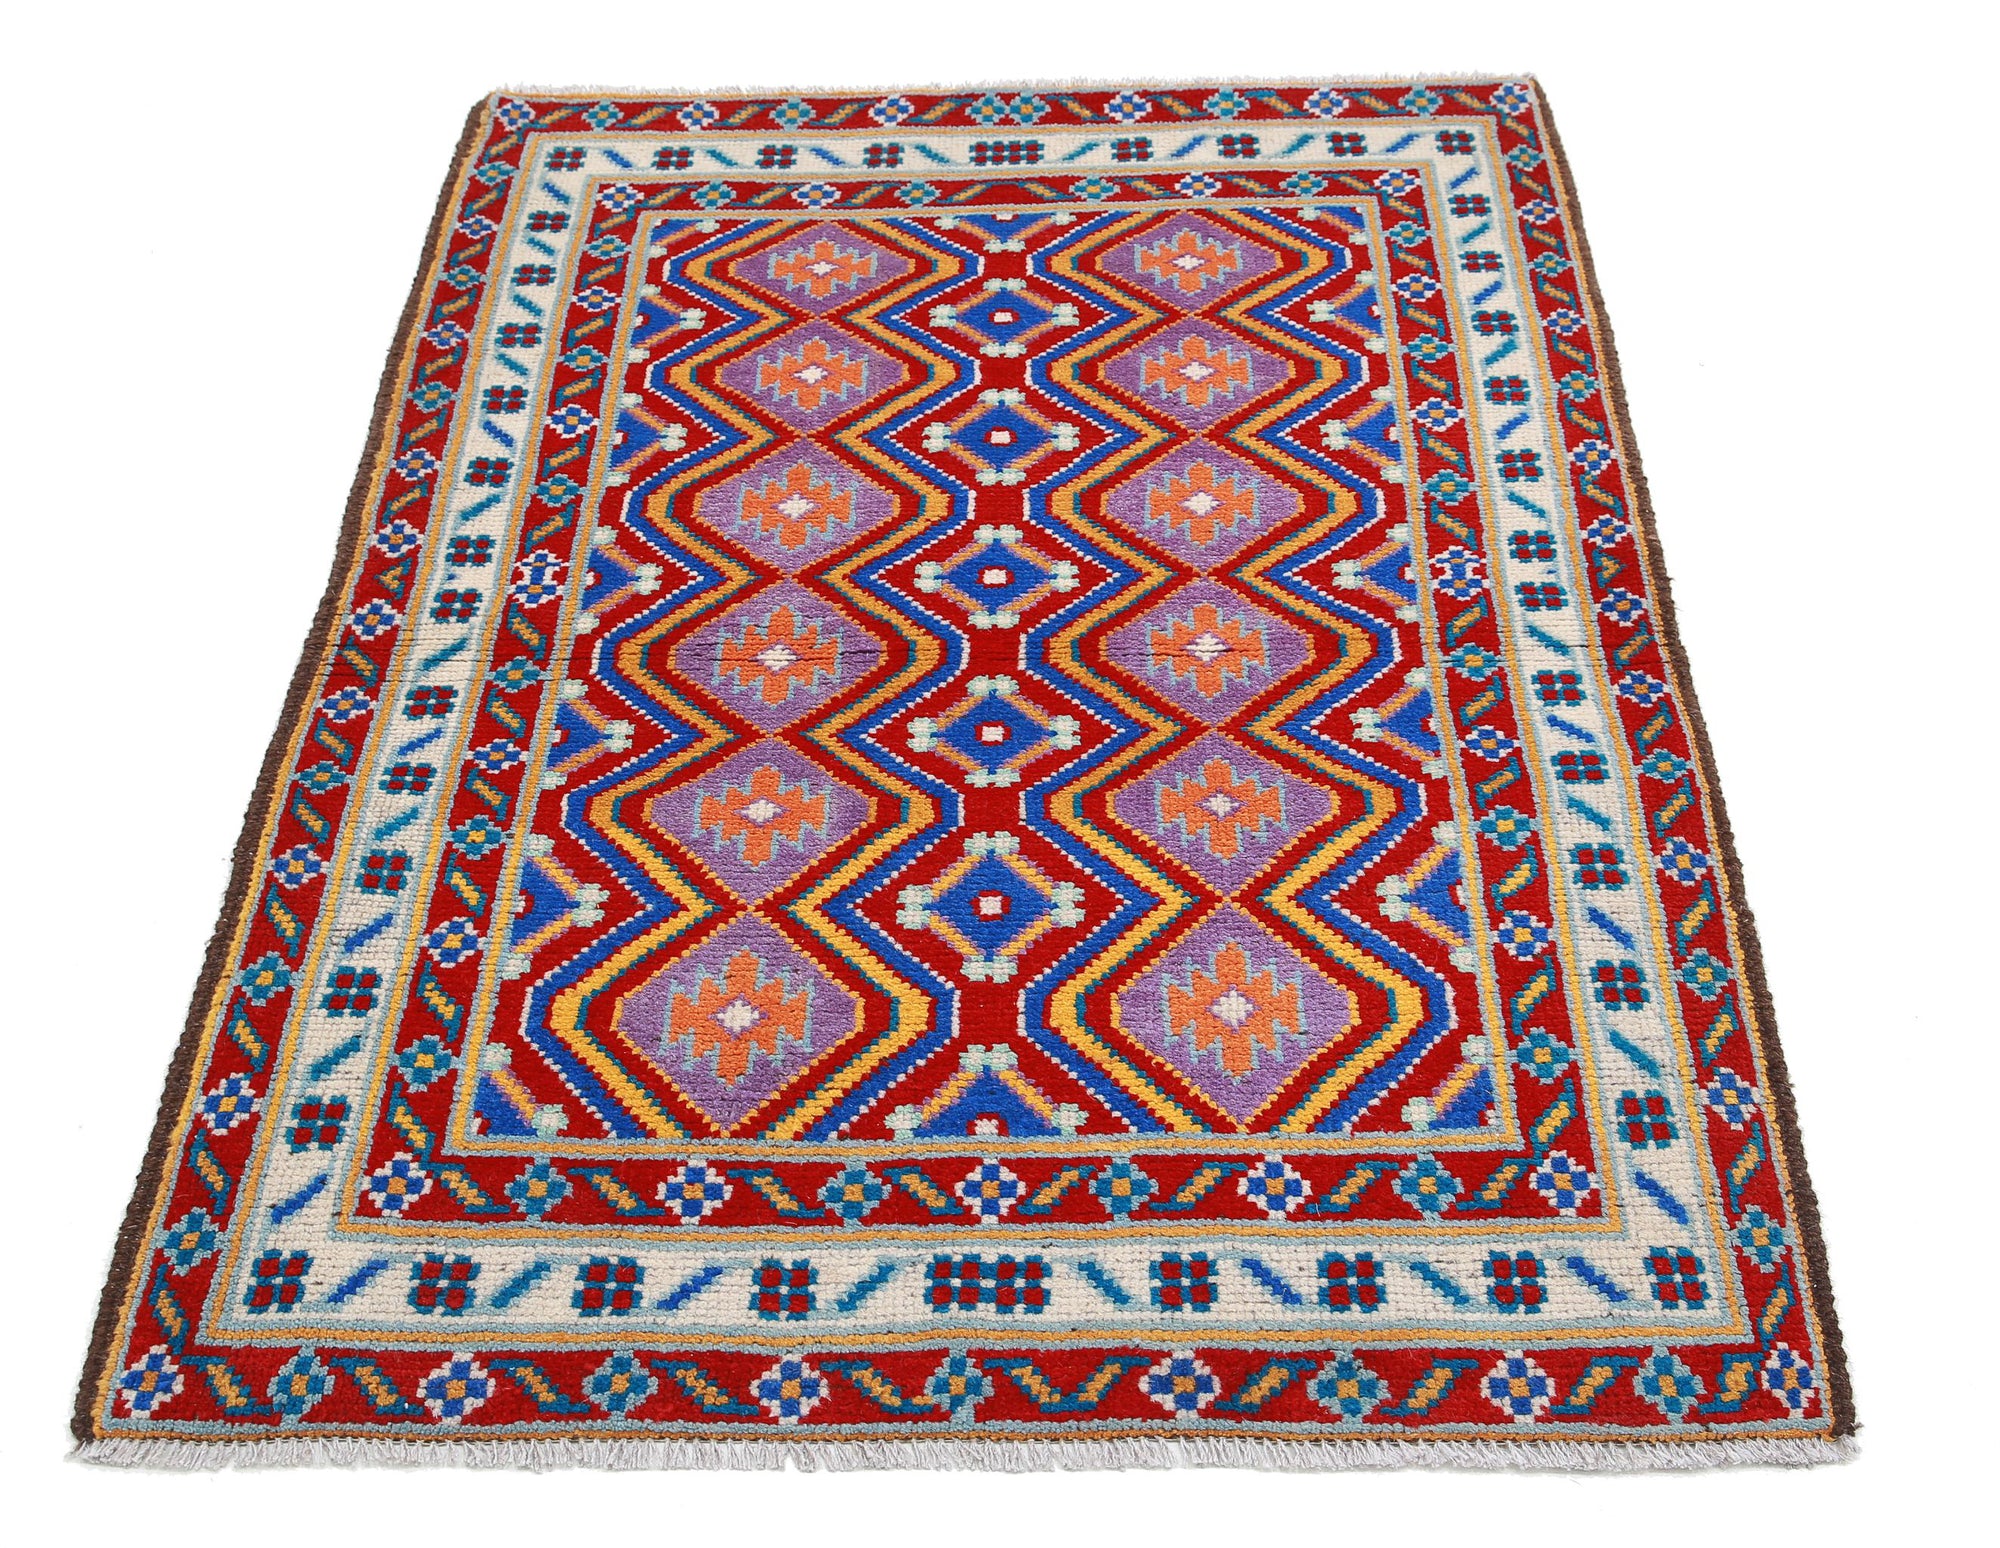 Revival-hand-knotted-qarghani-wool-rug-5014199-3.jpg